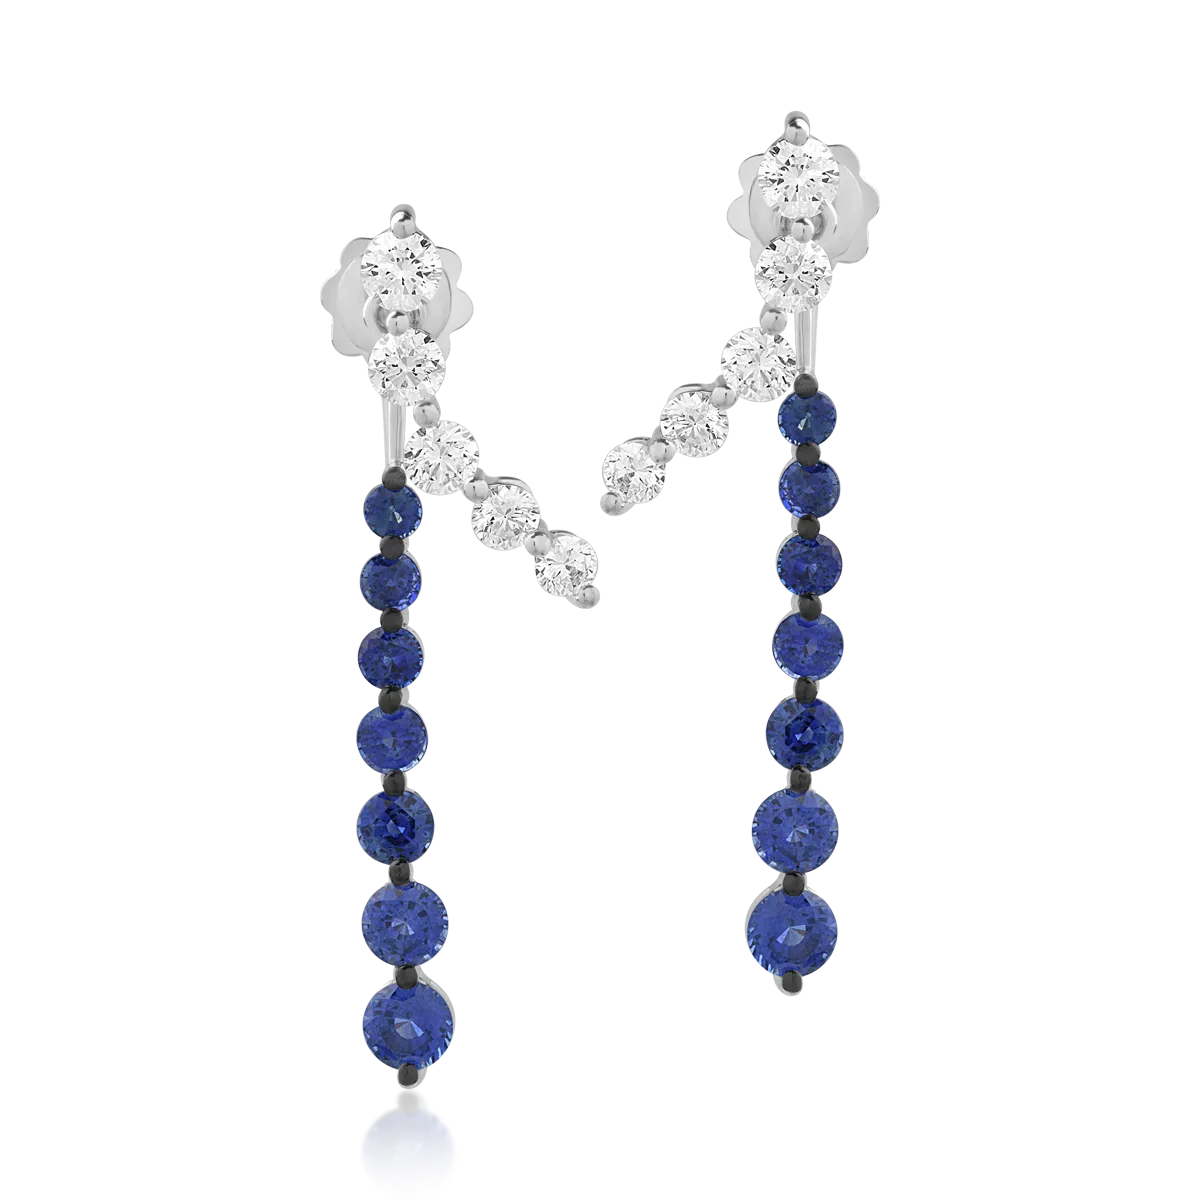 18K white gold earrings with 3.04ct sapphires and 1.43ct diamonds